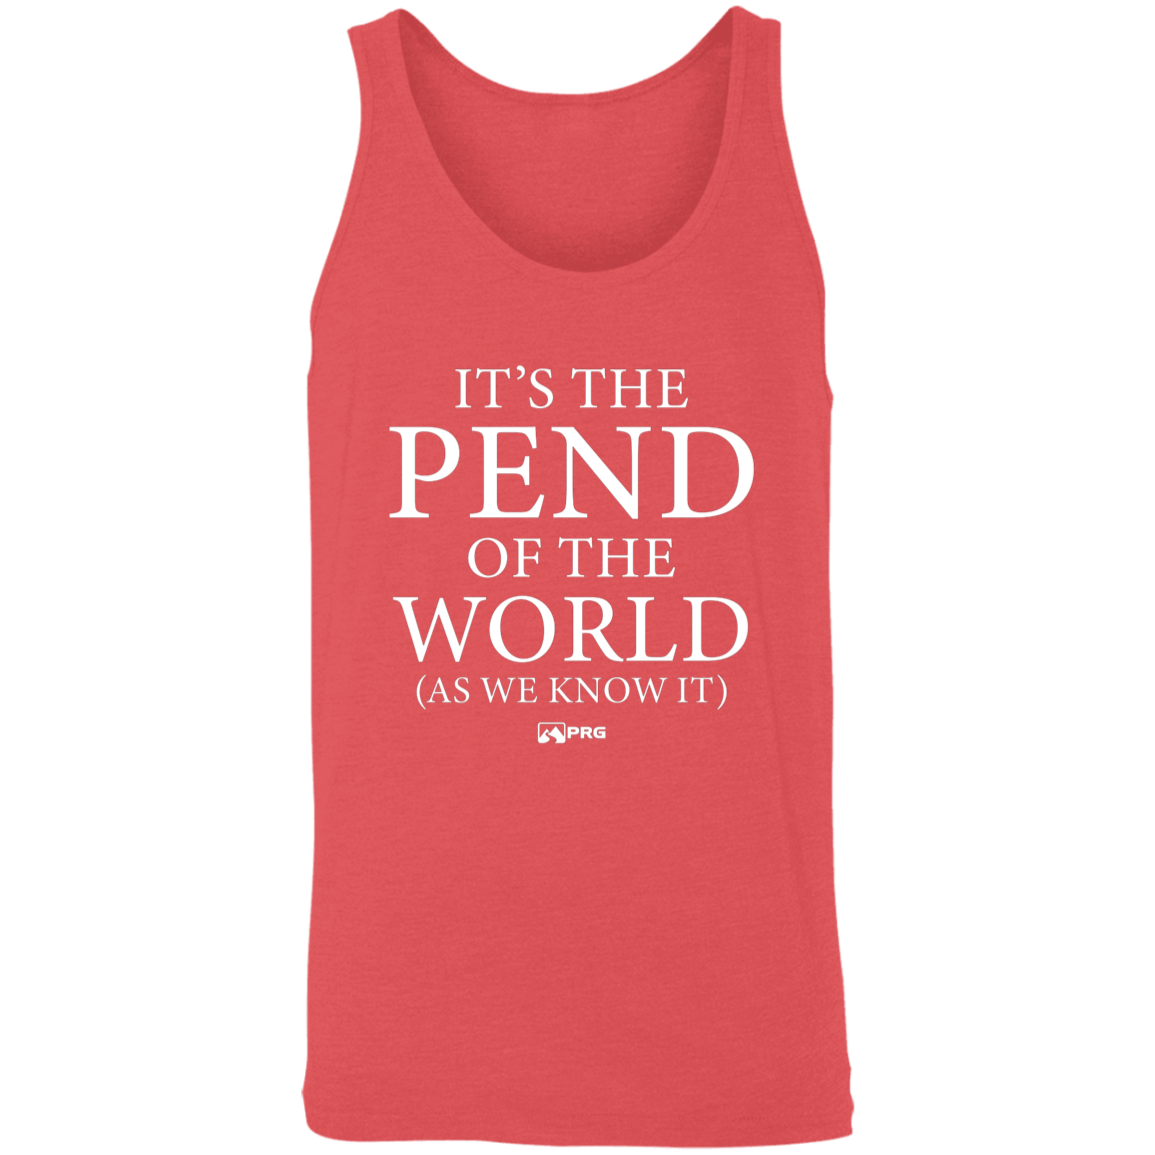 Pend of the World - Tank